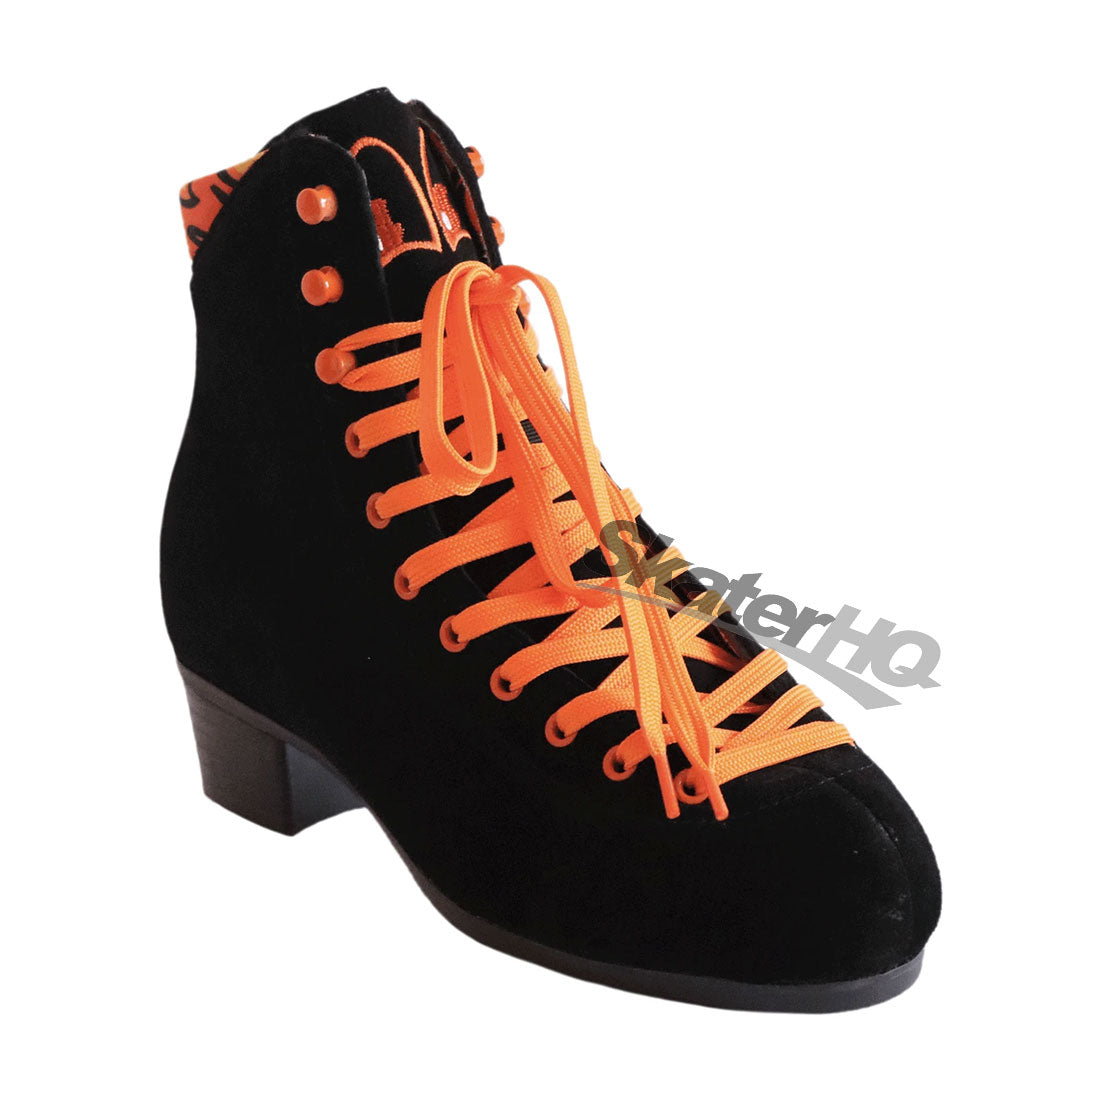 Chuffed Boot - Fuegote Black Roller Skate Boots